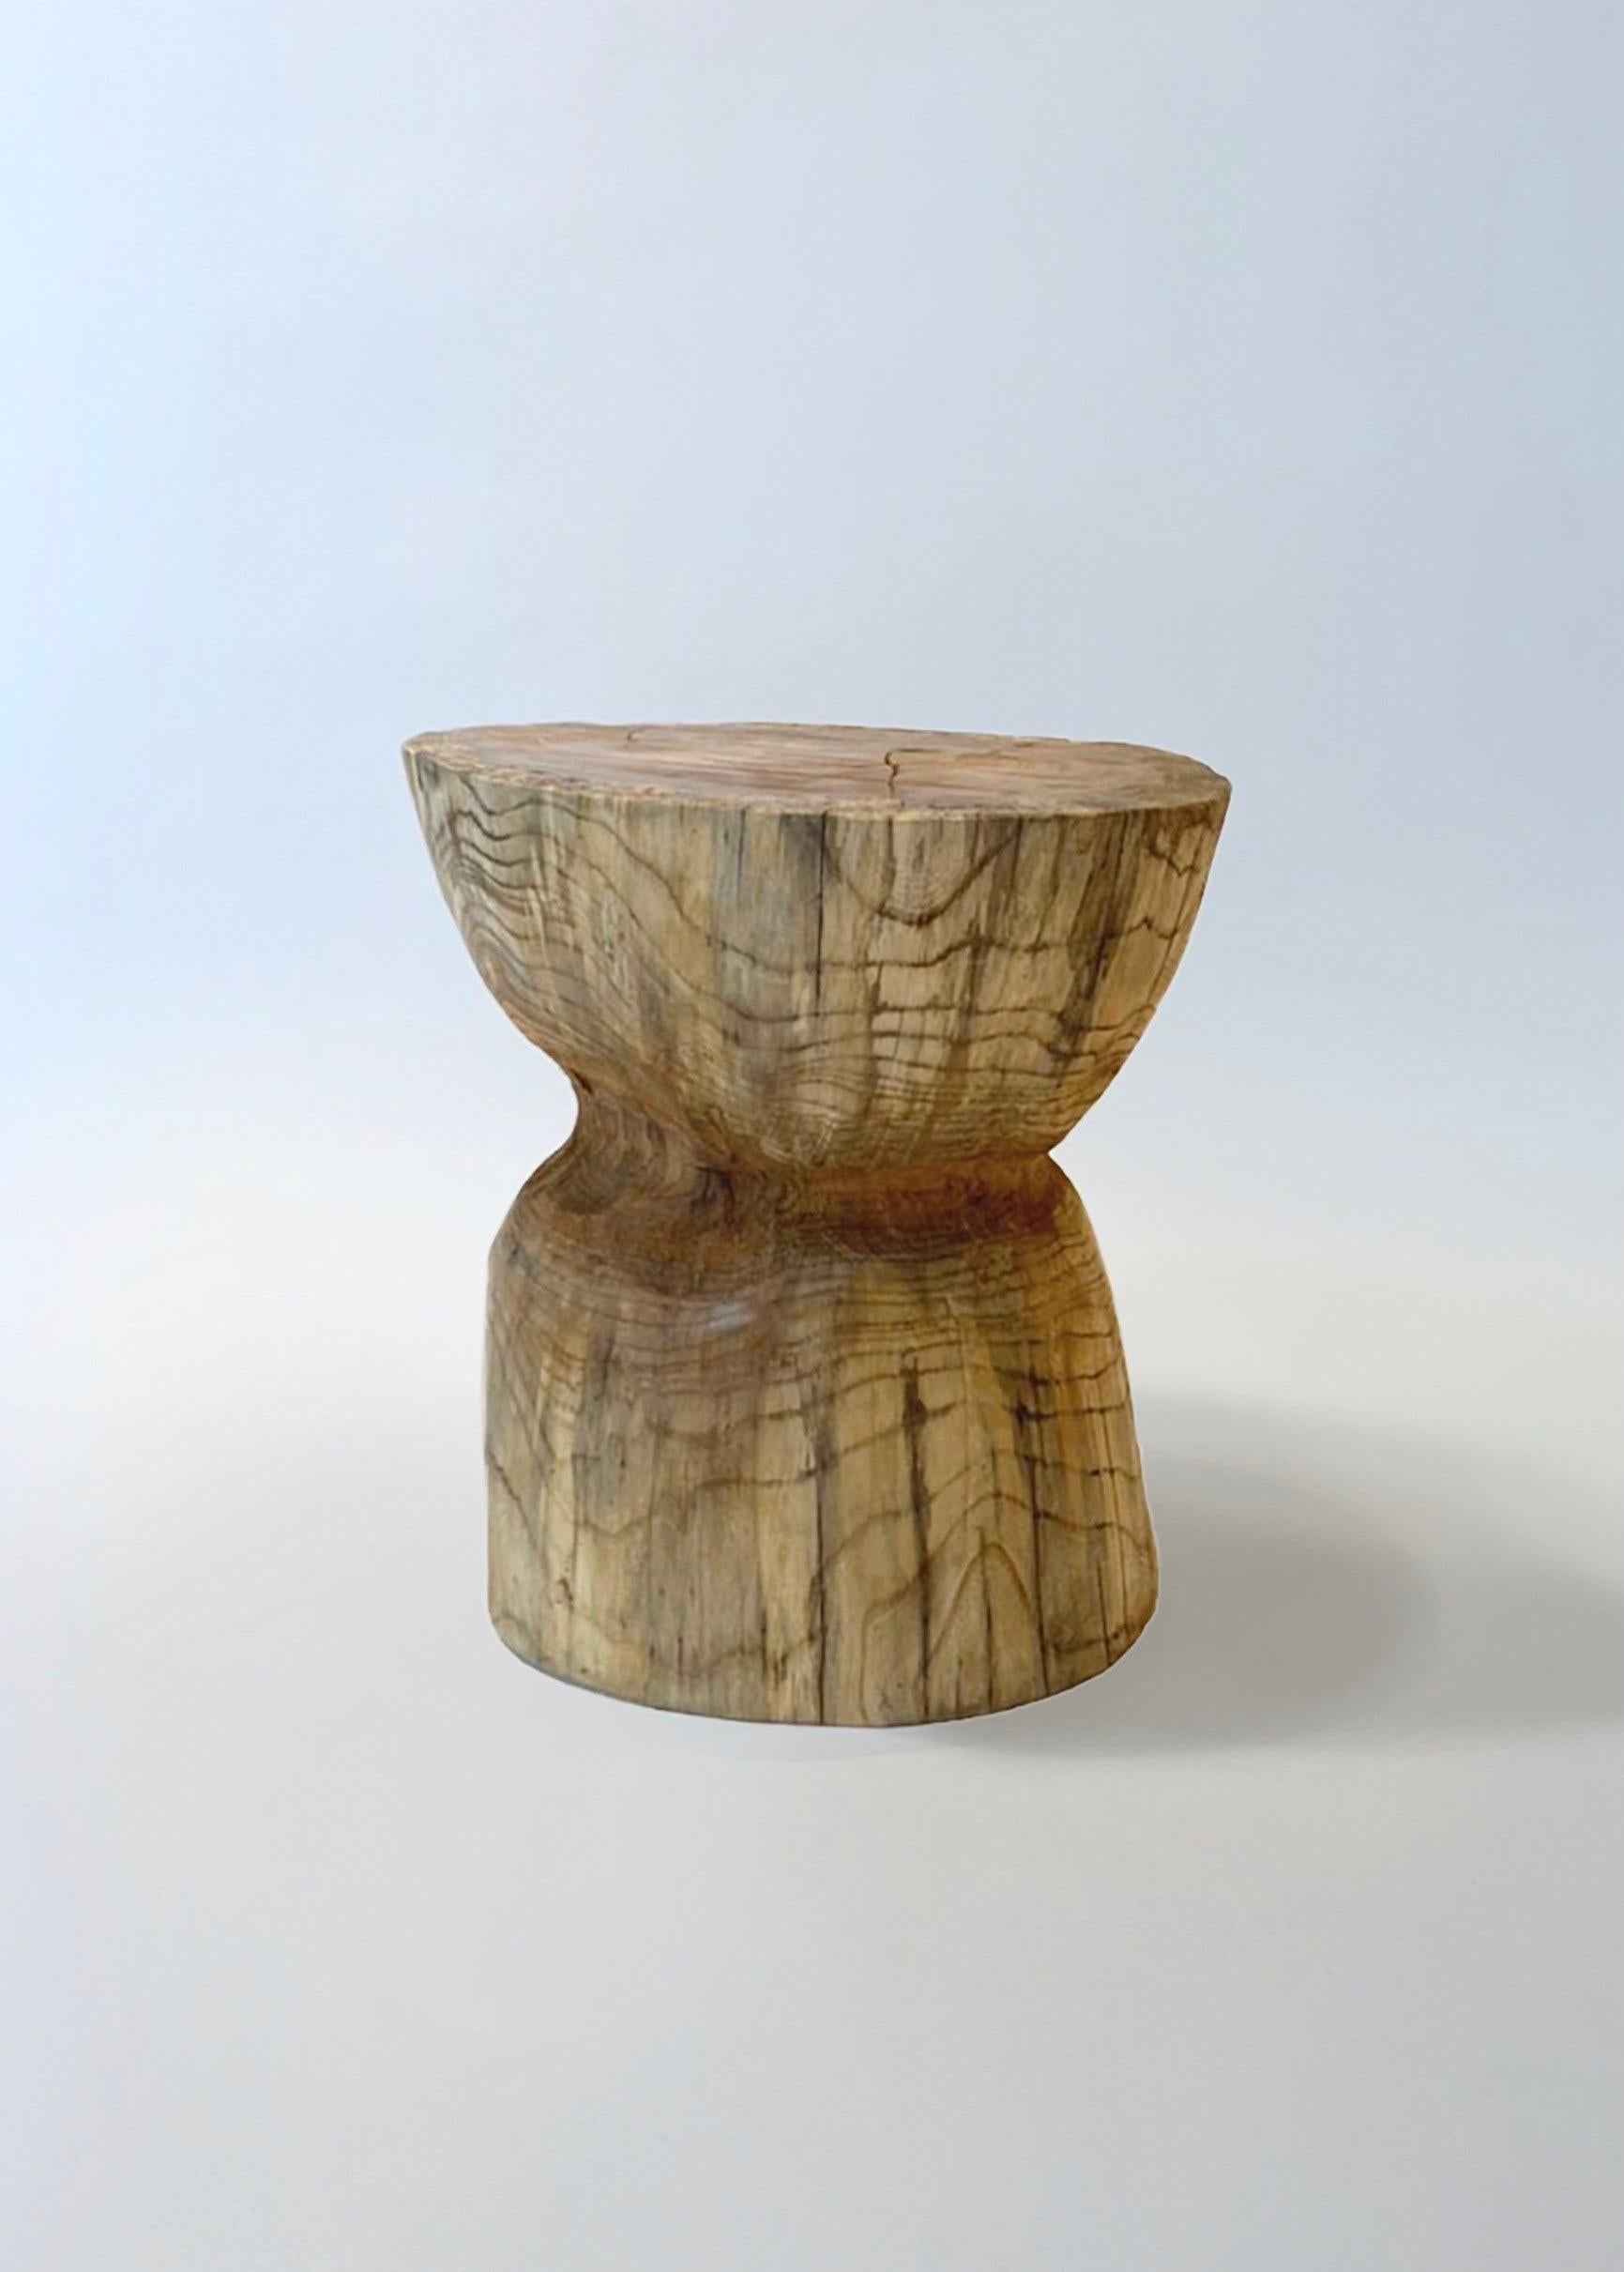 Hand-Carved Hiroyuki Nishimura Zougei Sculptural Side Table Stool 35 Tribal Glamping For Sale